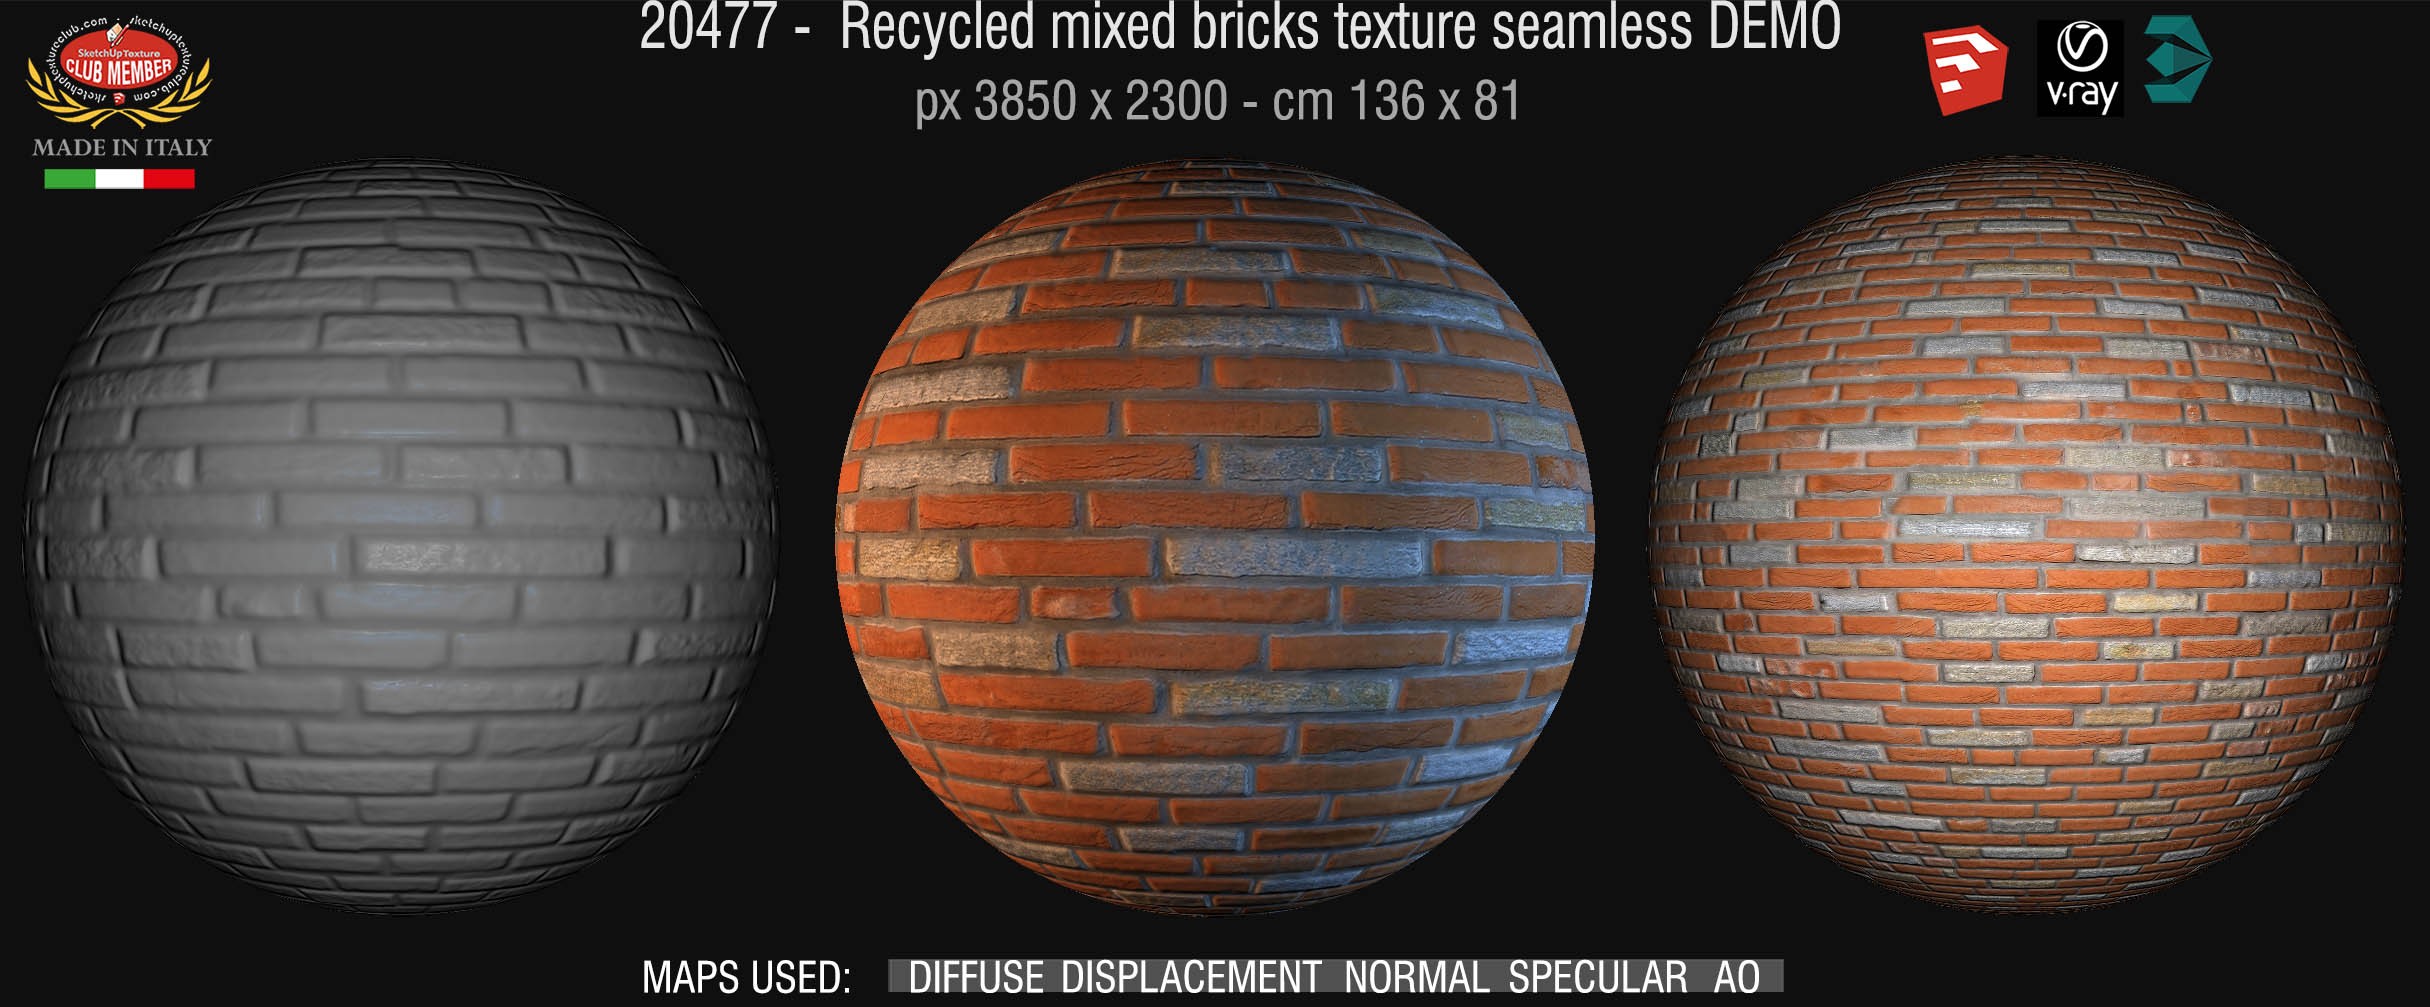 20477  Recycled mixed bricks texture seamless + maps DEMO